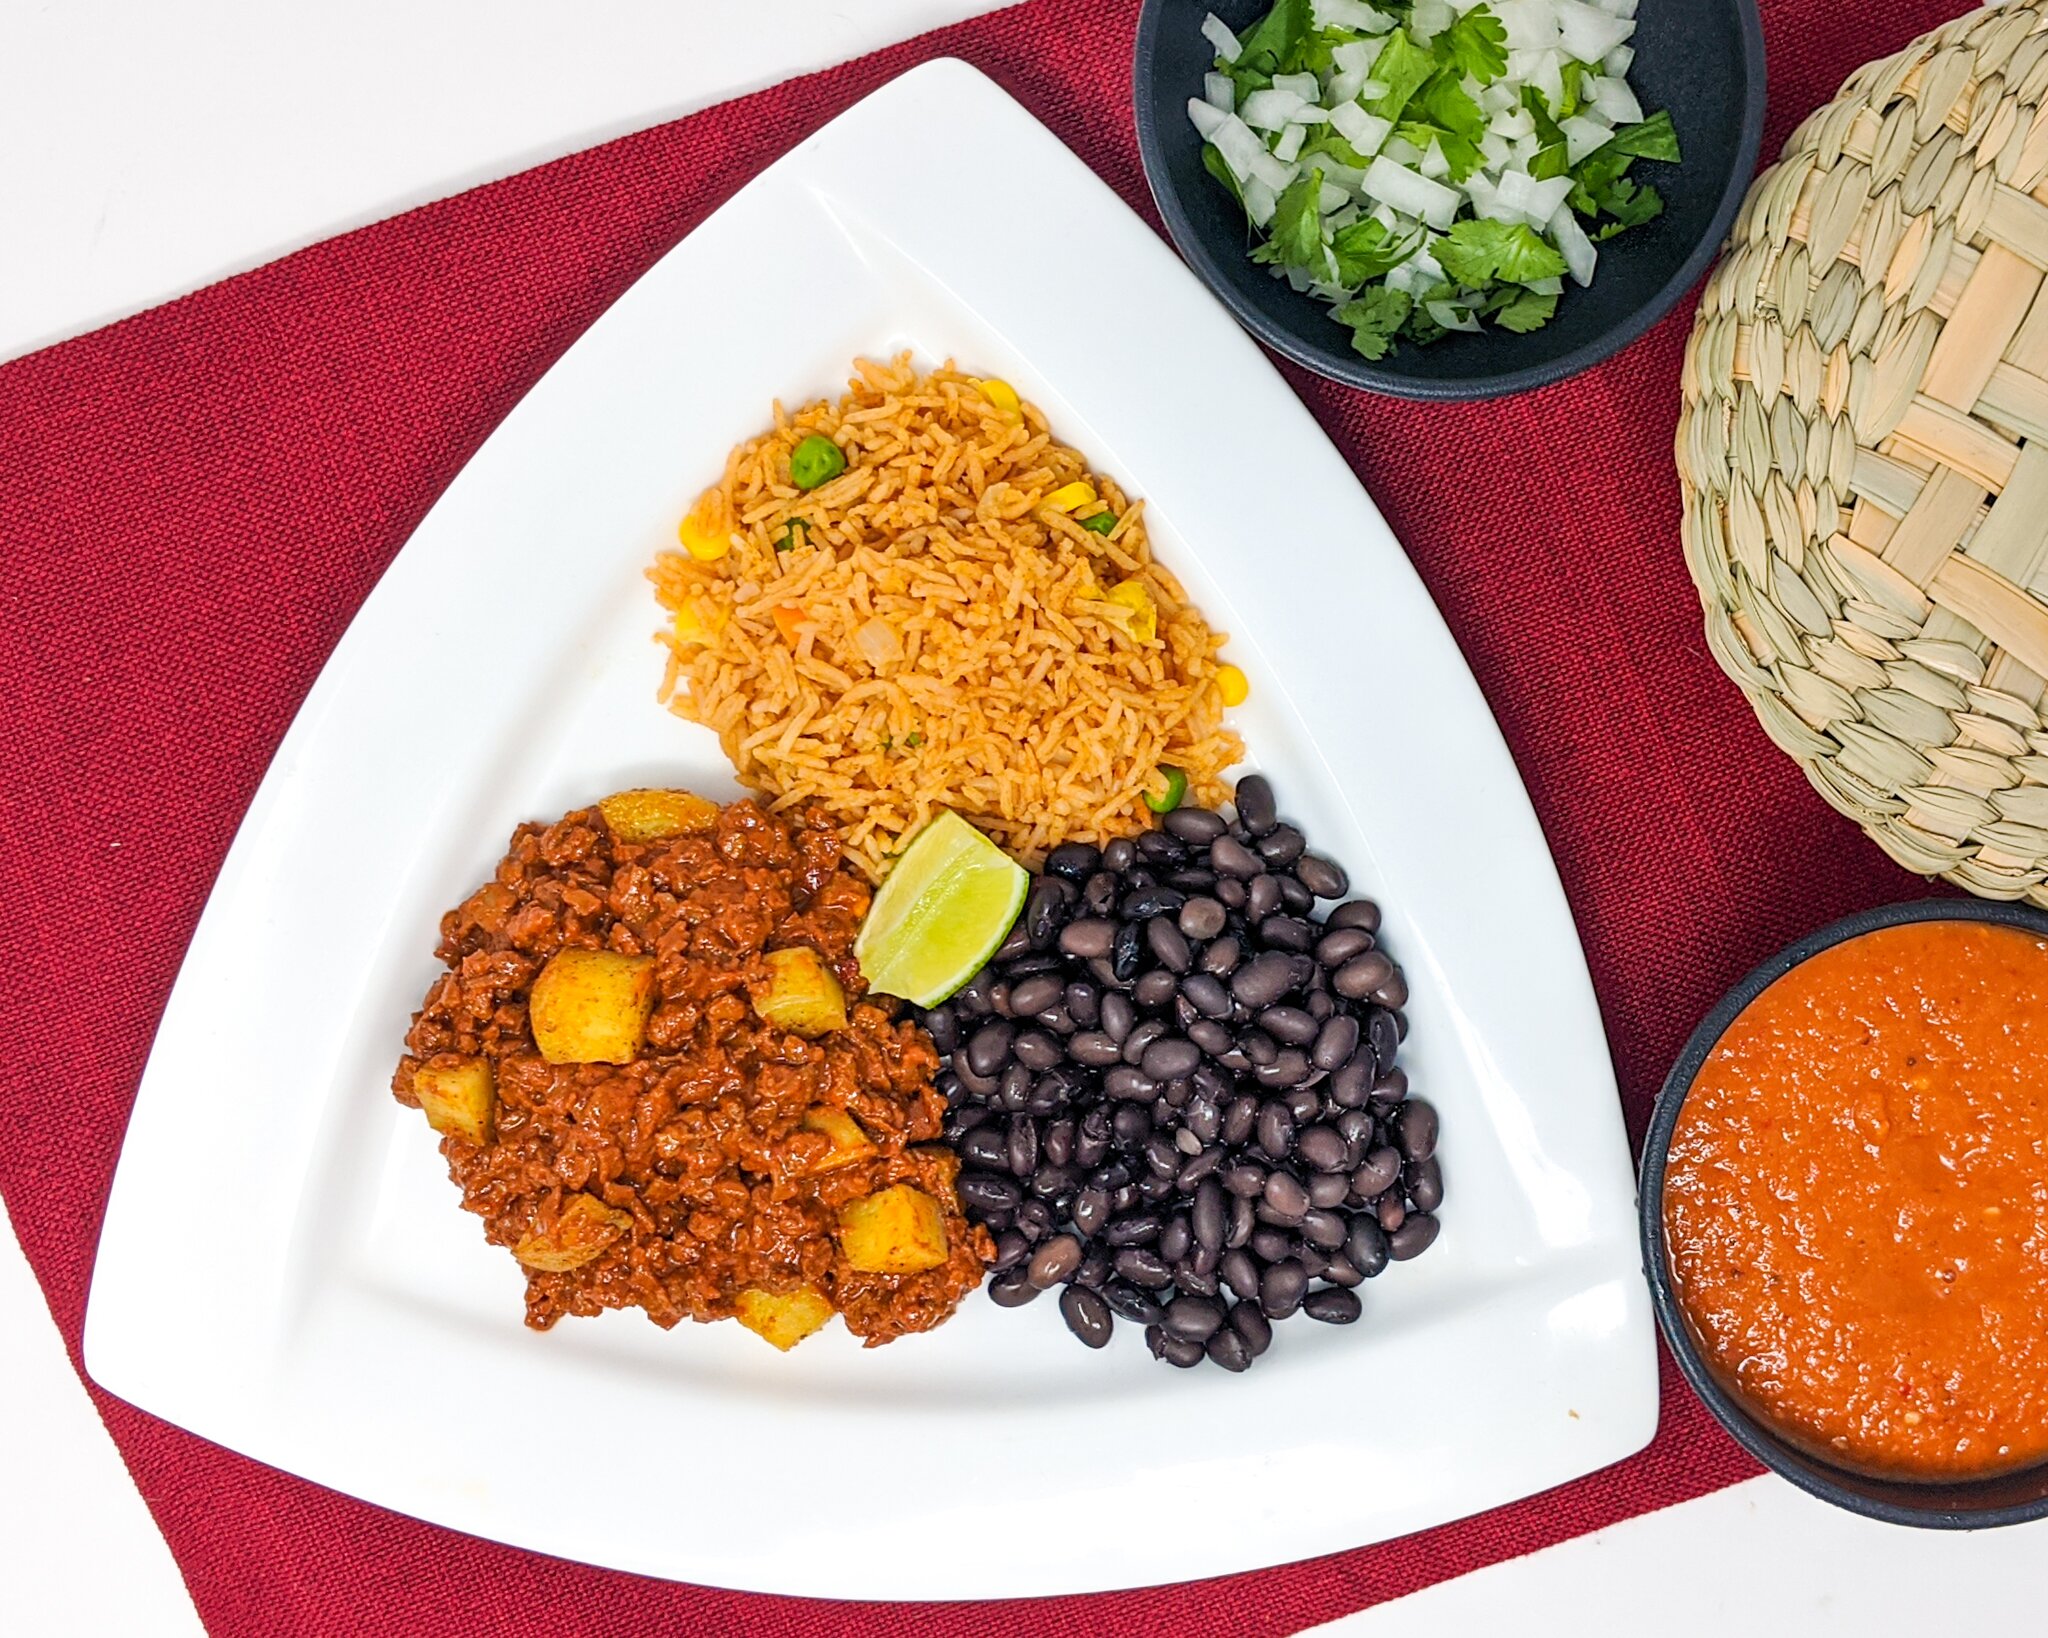 Vegan taco plate with soyrizo, potatoes, rice, beans, and salsa for catering}